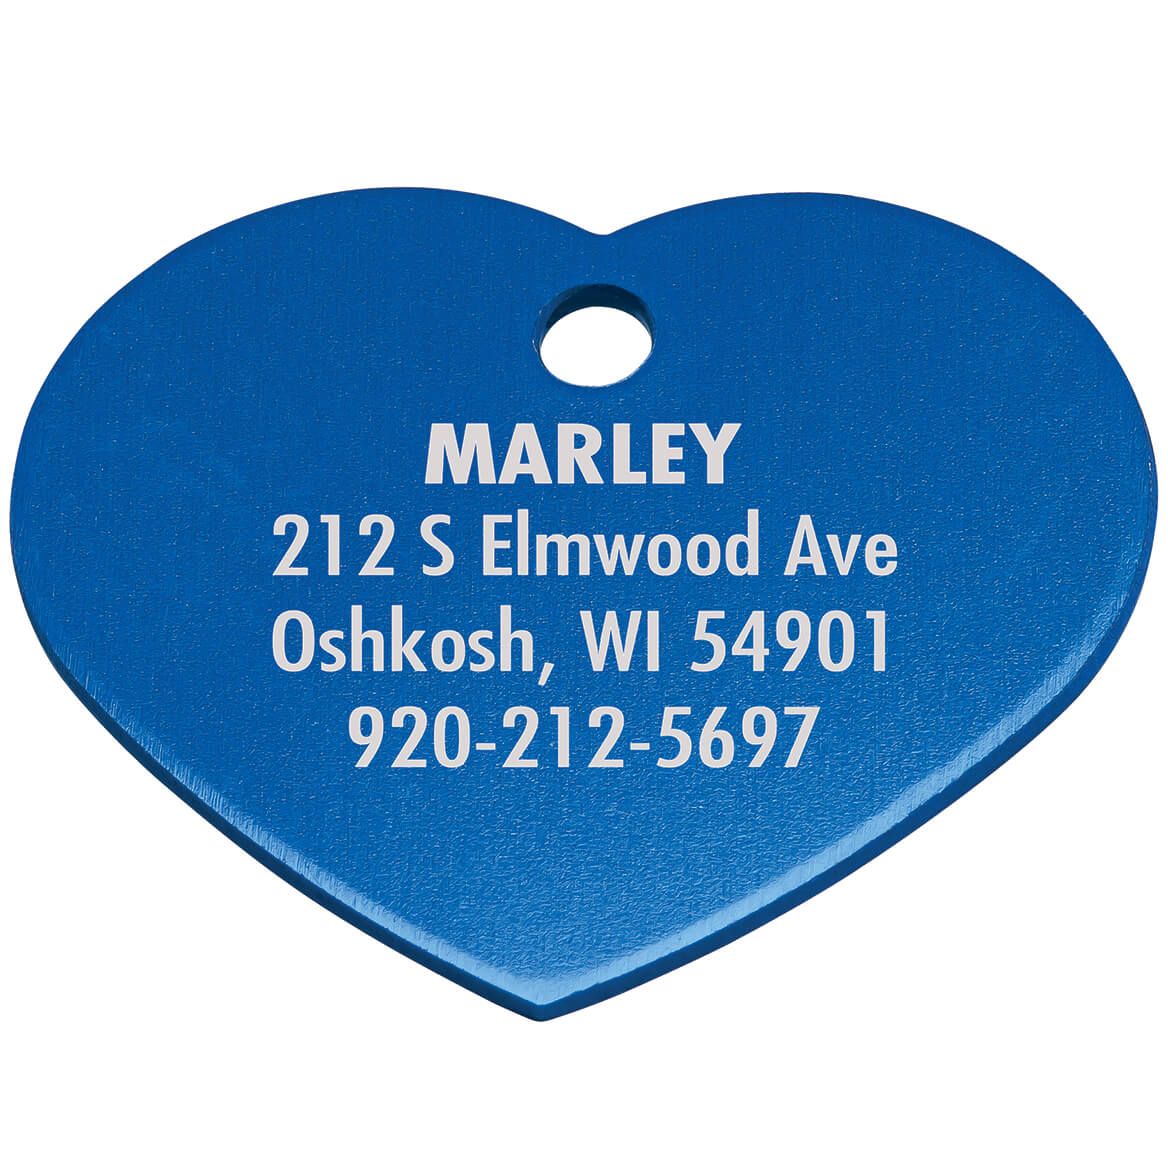 Personalized Heart-Shaped Pet Tag + '-' + 369471